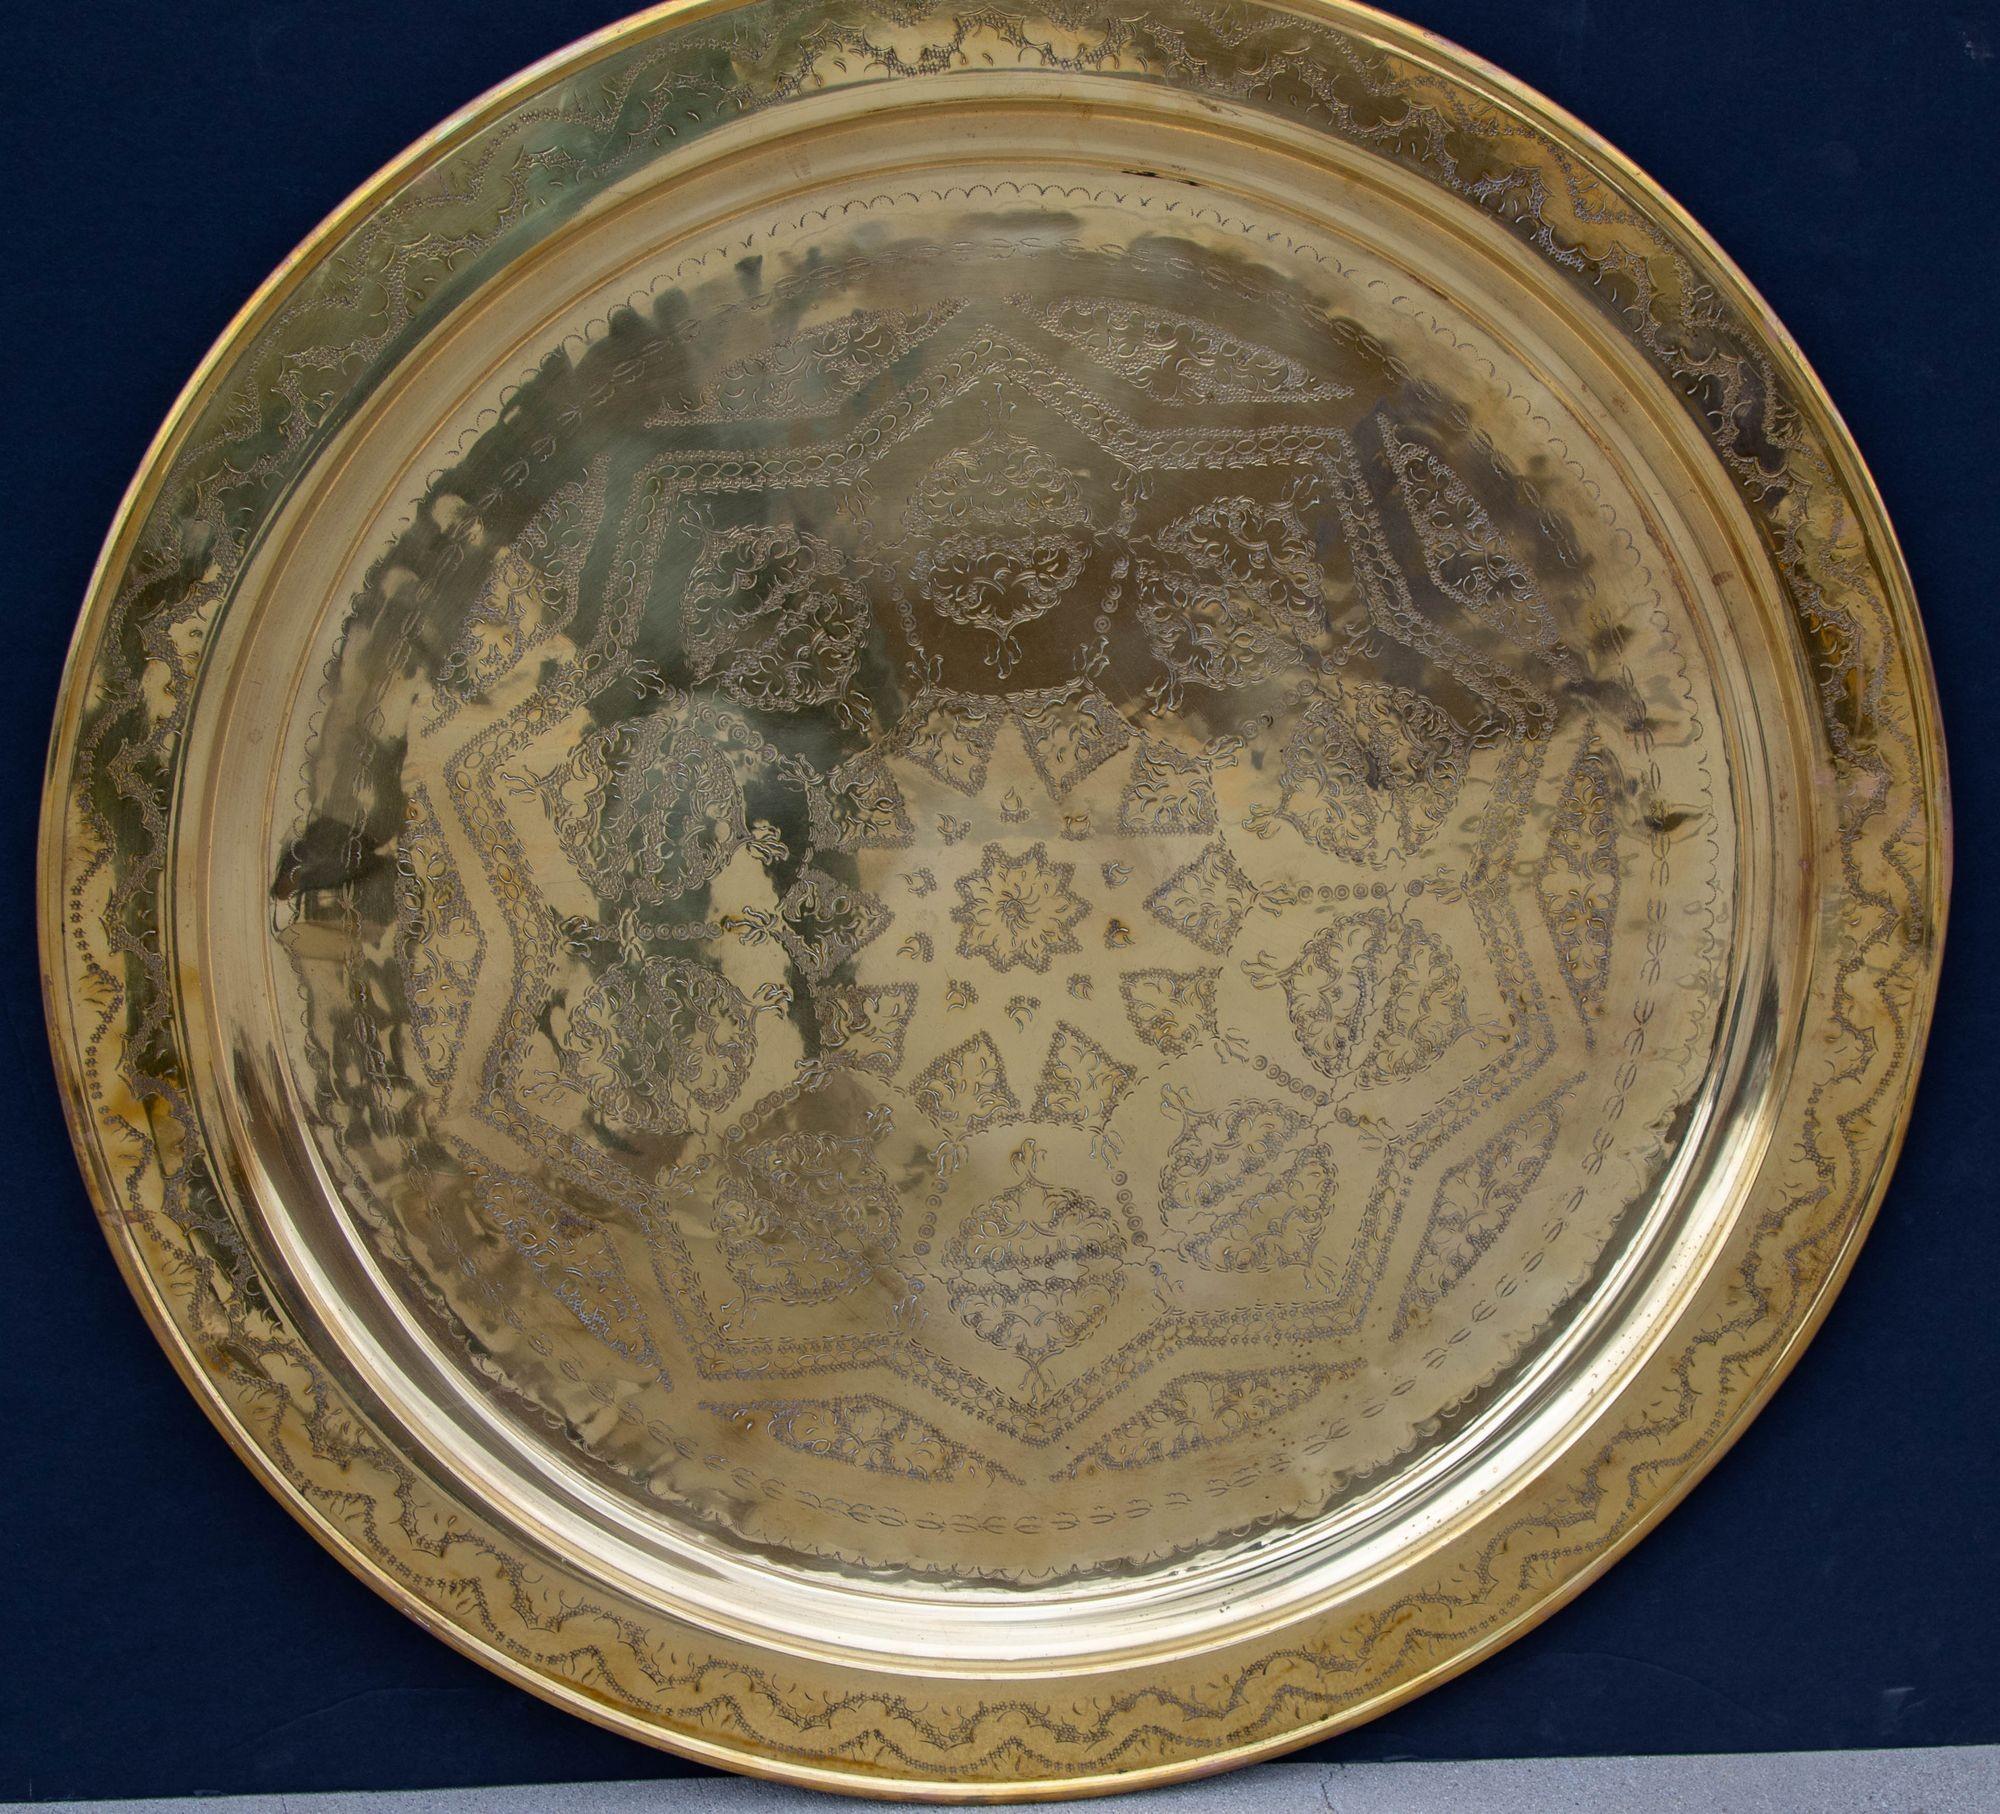 Antique 19th century oversized round shape Moroccan polished metal brass tray platter. 
Polished decorative metal round brass tray with very fine intricate geometric Moorish Islamic designs. 
Hand-hammered and chiseled in floral and geometric